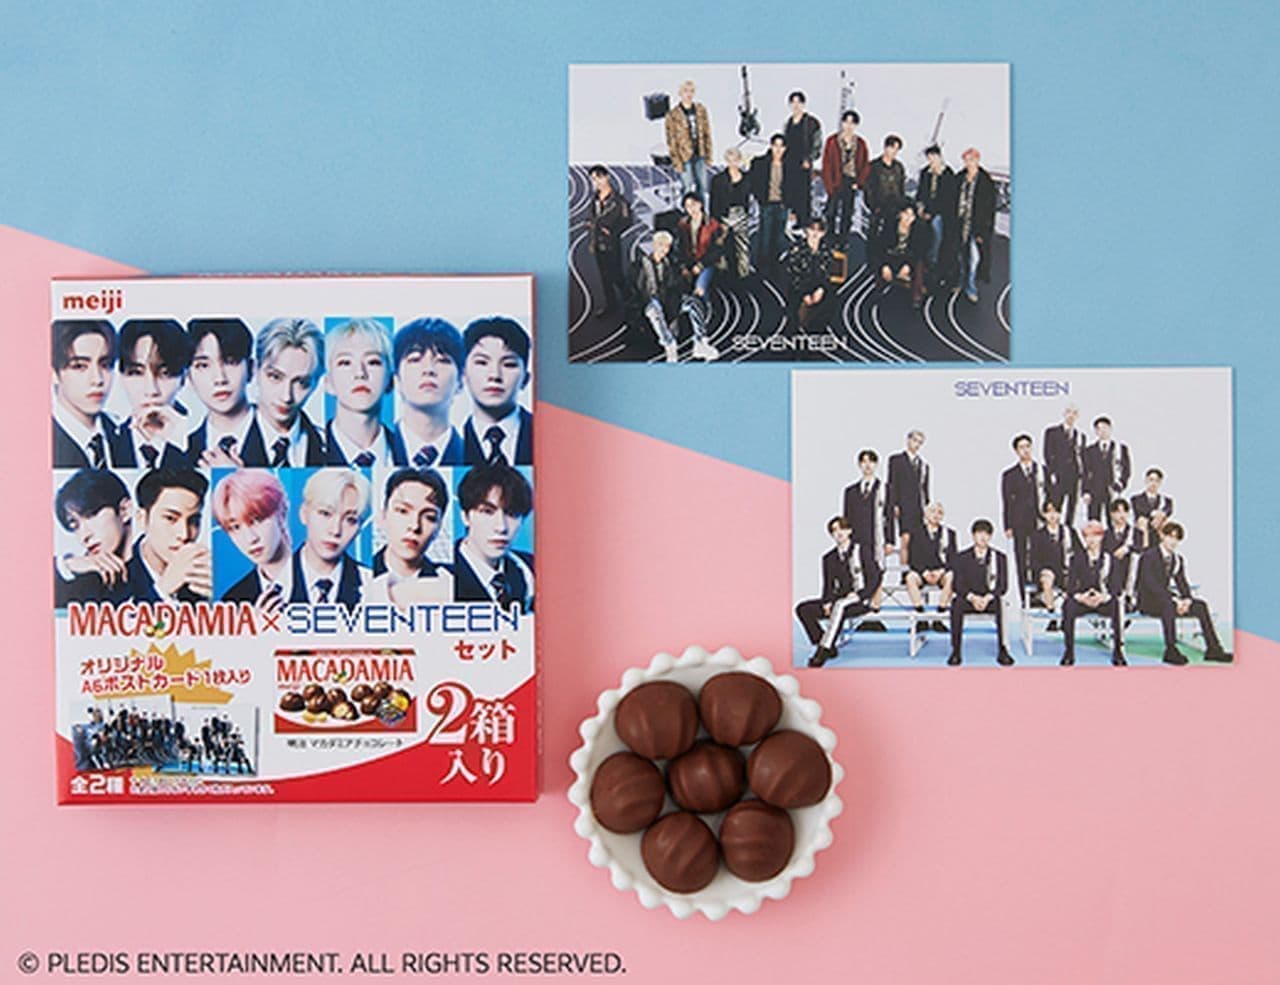 Newly released on Nov. 22nd: LAWSON's new sweets!